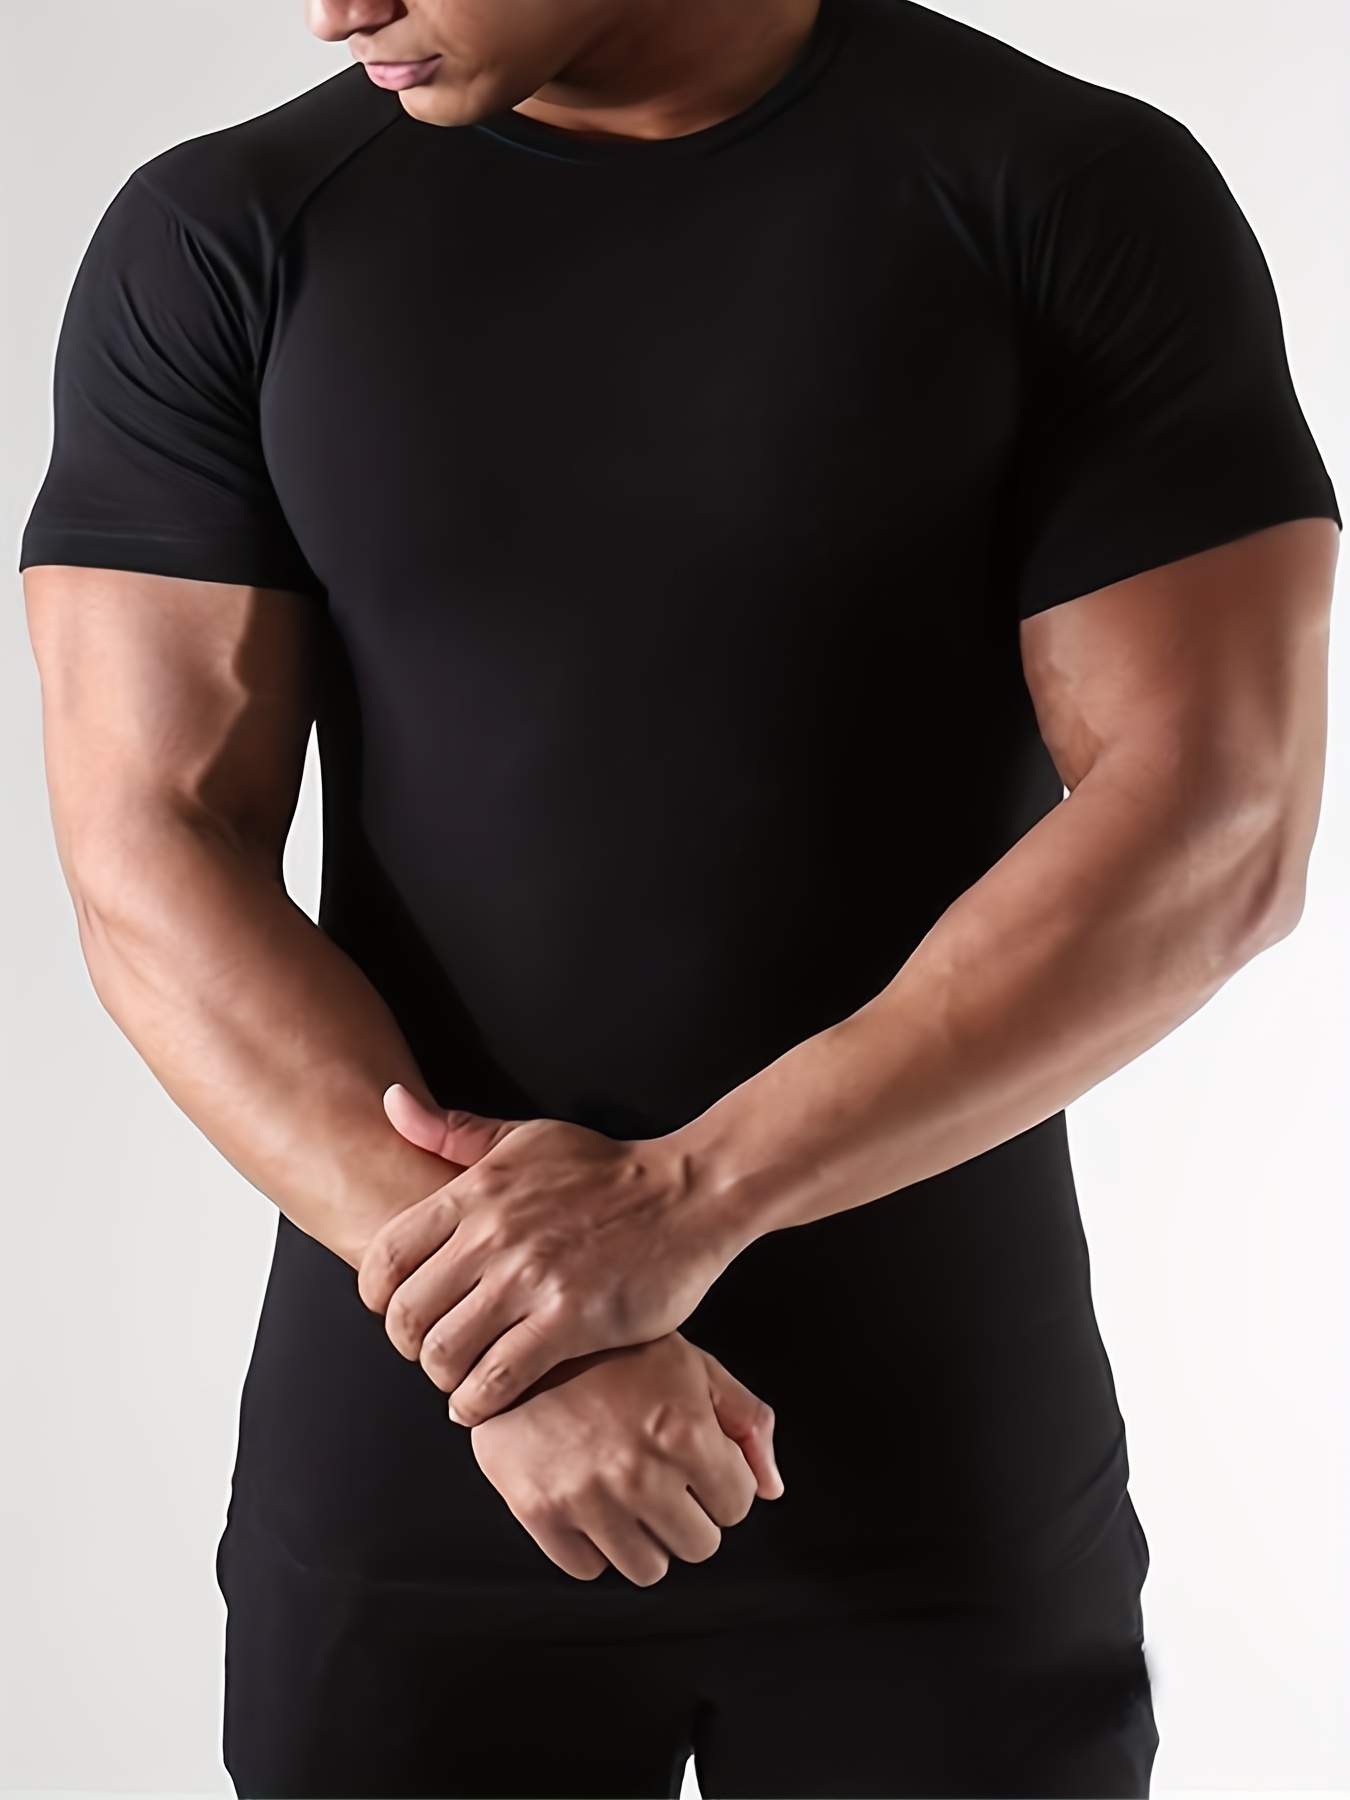  Qopobobo Black T Shirts for Men Men's Cotton Performance Short  Sleeve T-Shirt Gym Workout Short Sleeve Tee Slim Fit Blouse : Clothing,  Shoes & Jewelry